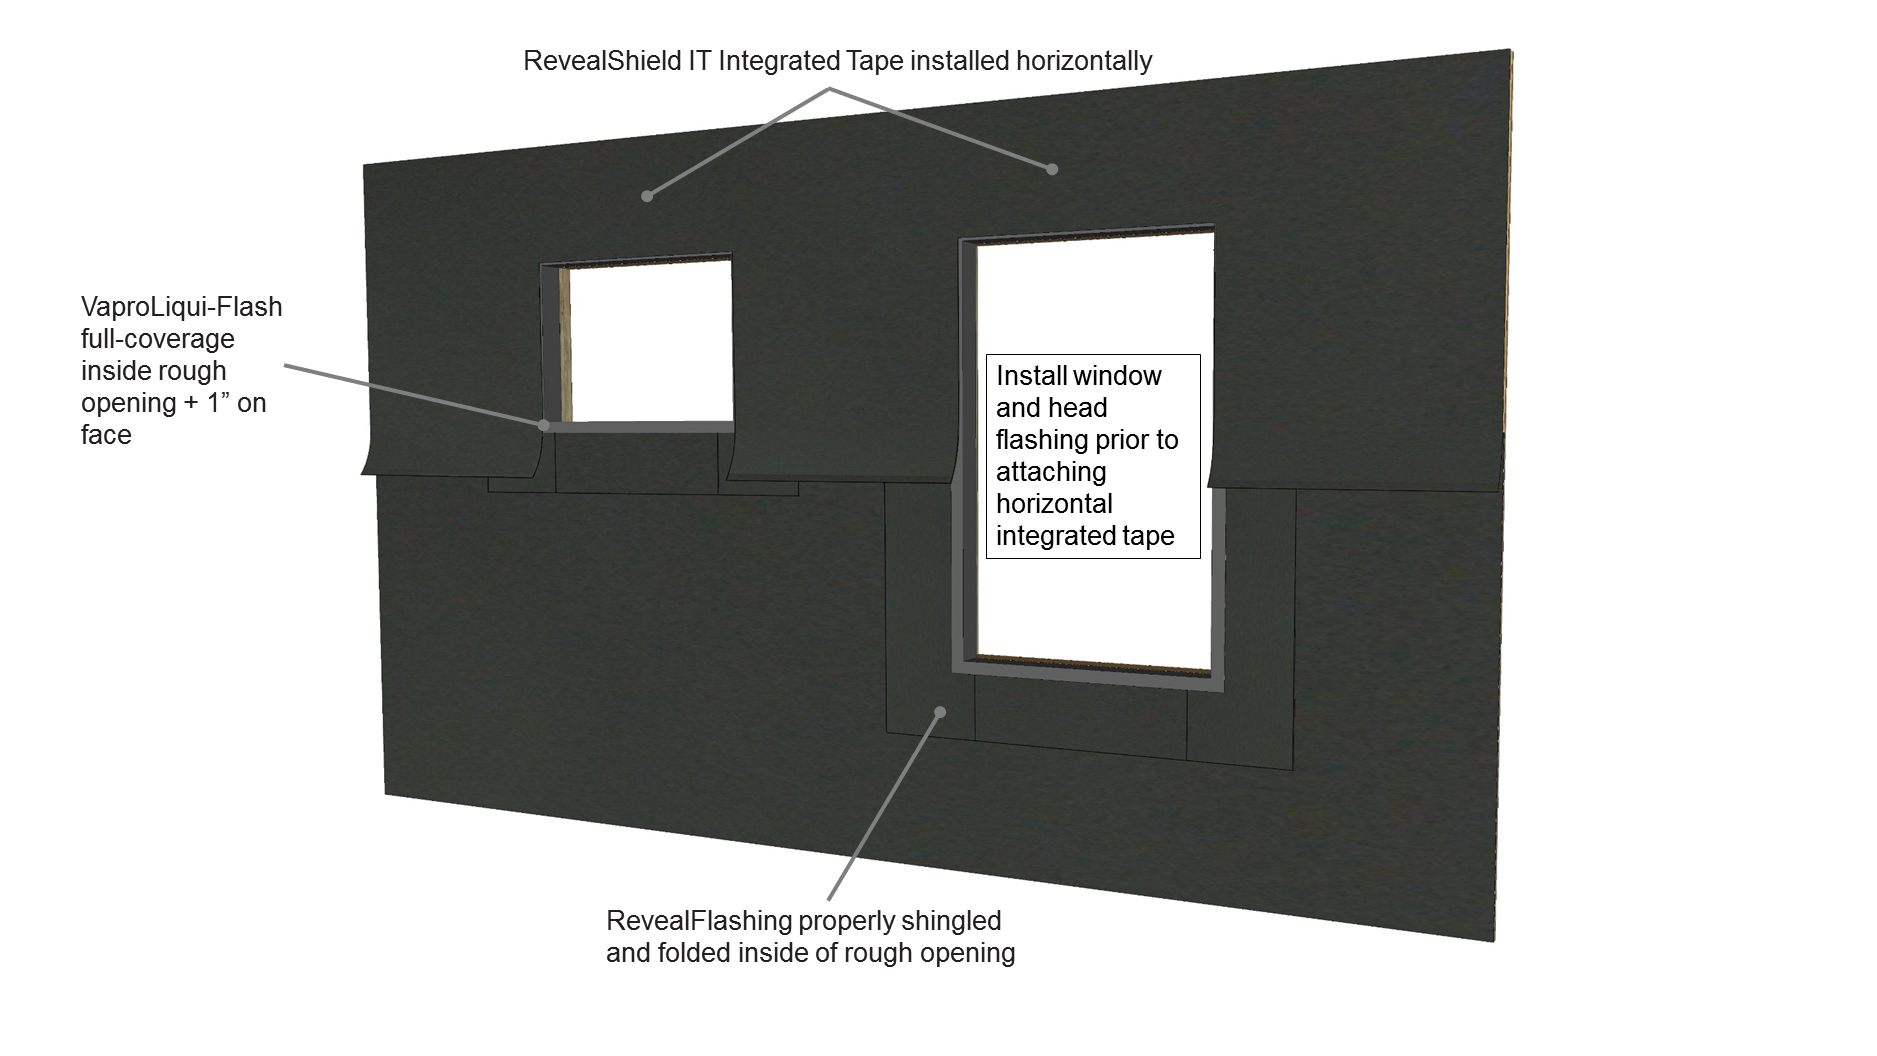 VS 164 RevealShield ROSequence 062816 image callout